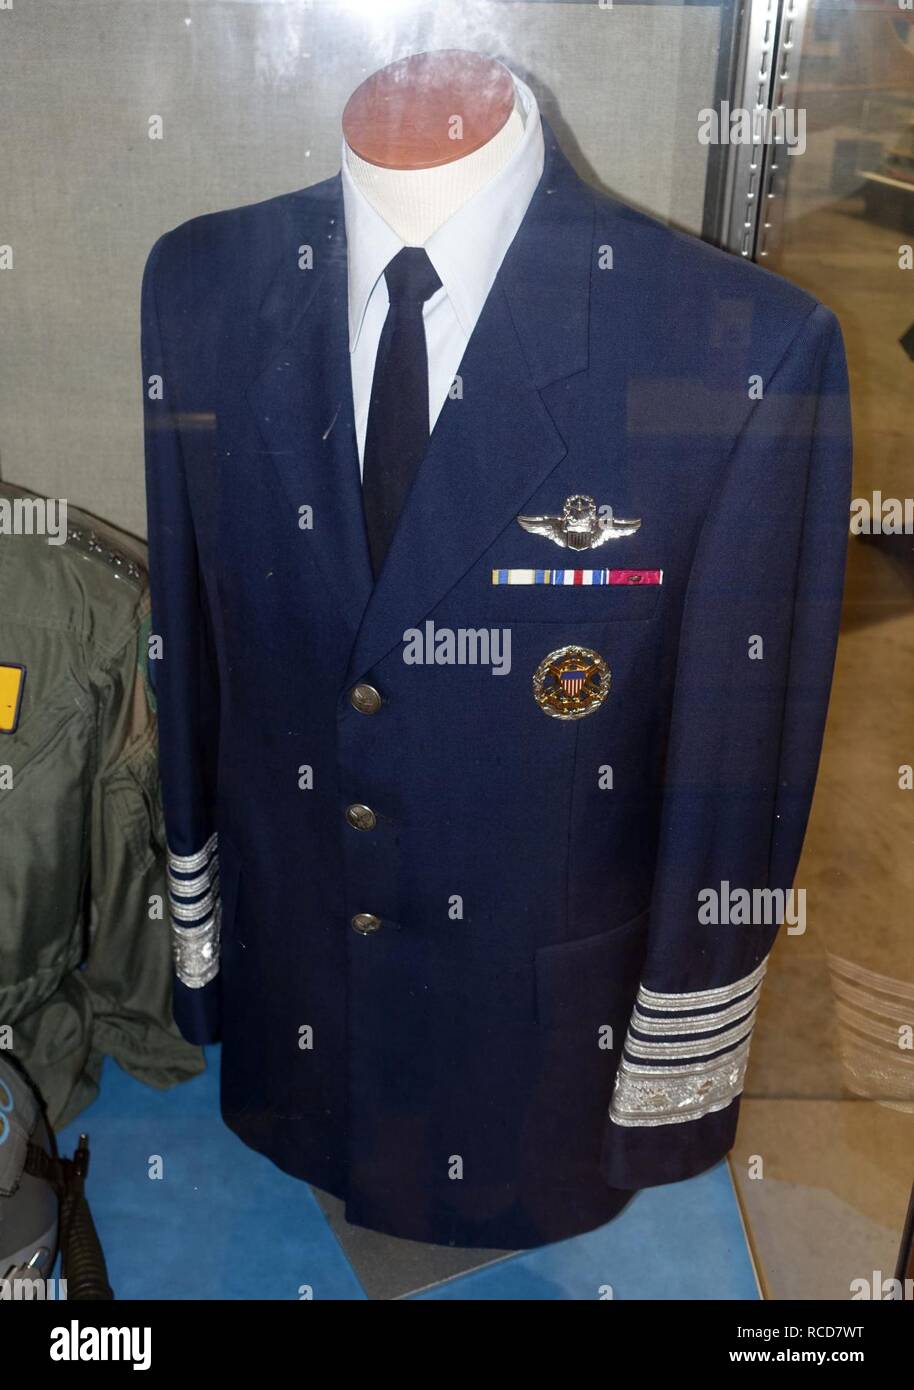 Air Force Chief of Staff uniform, Merrill McPeak exhibit - Oregon Air and Space Stock Photo